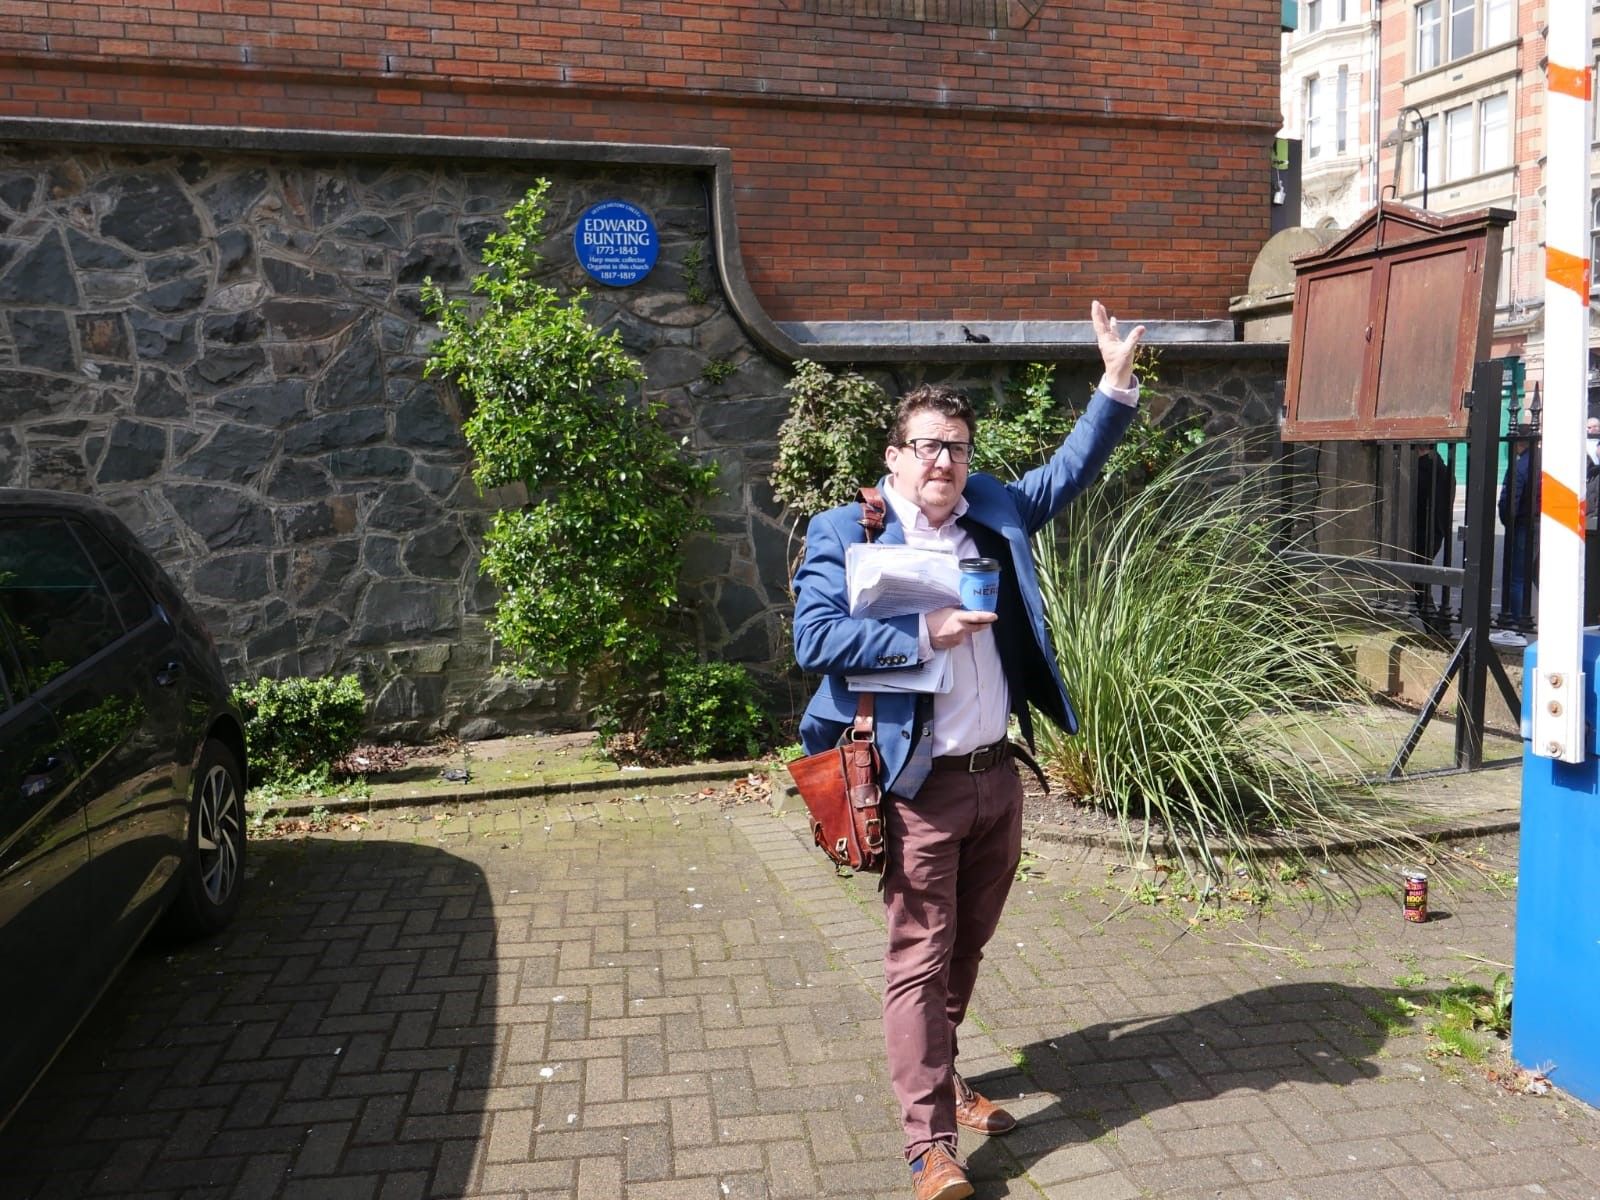 WALKING TOUR: Séan Napier, delivering his 1798 Walking Tour by the plaque to Irish Musician, Edward Bunting